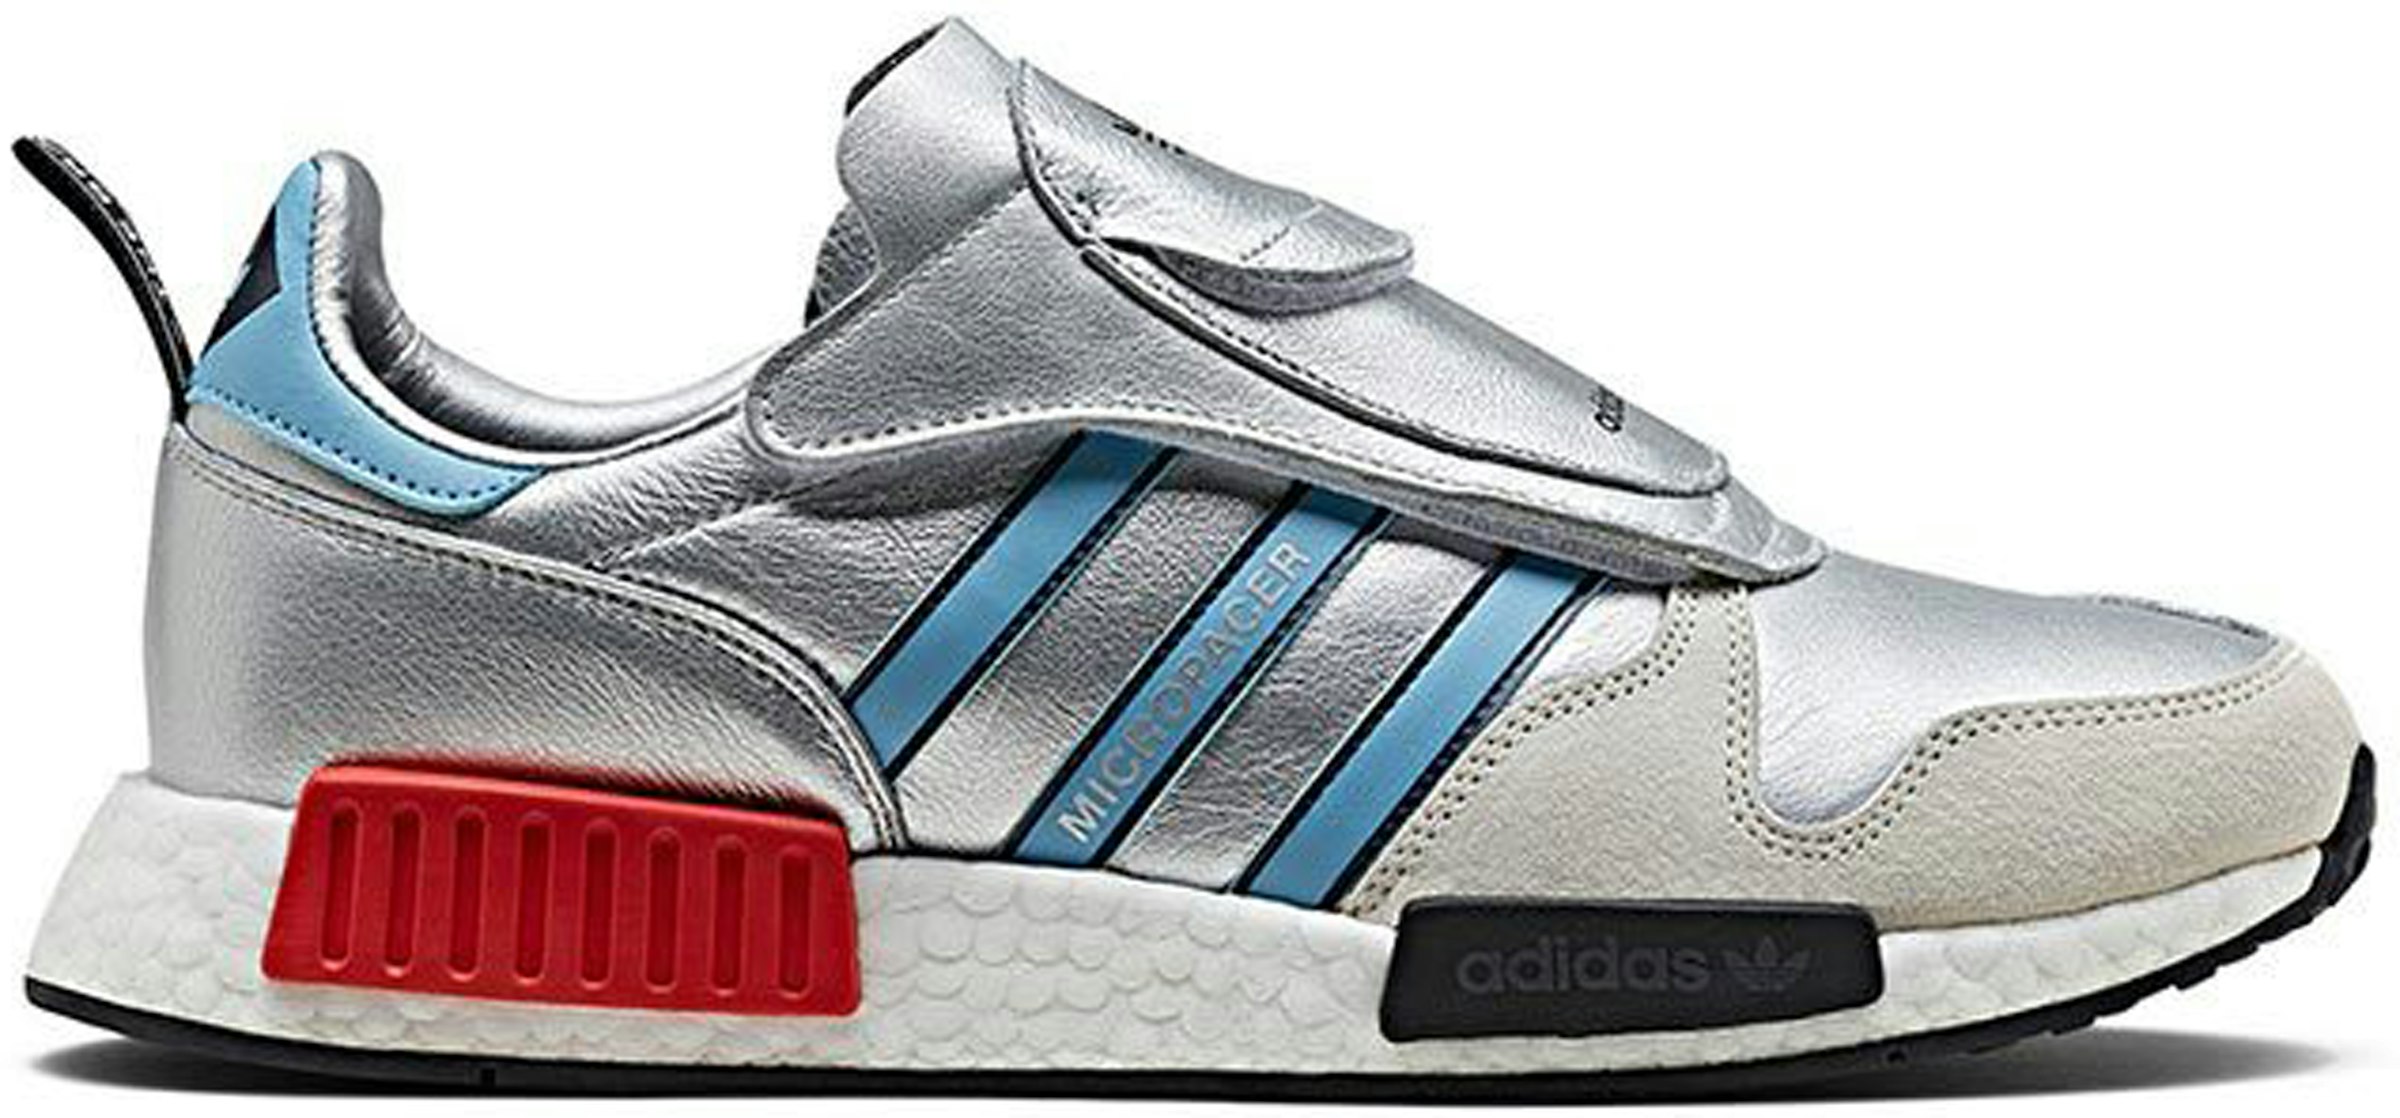 adidas X R1 Never Made Pack Men's - G26778 - US